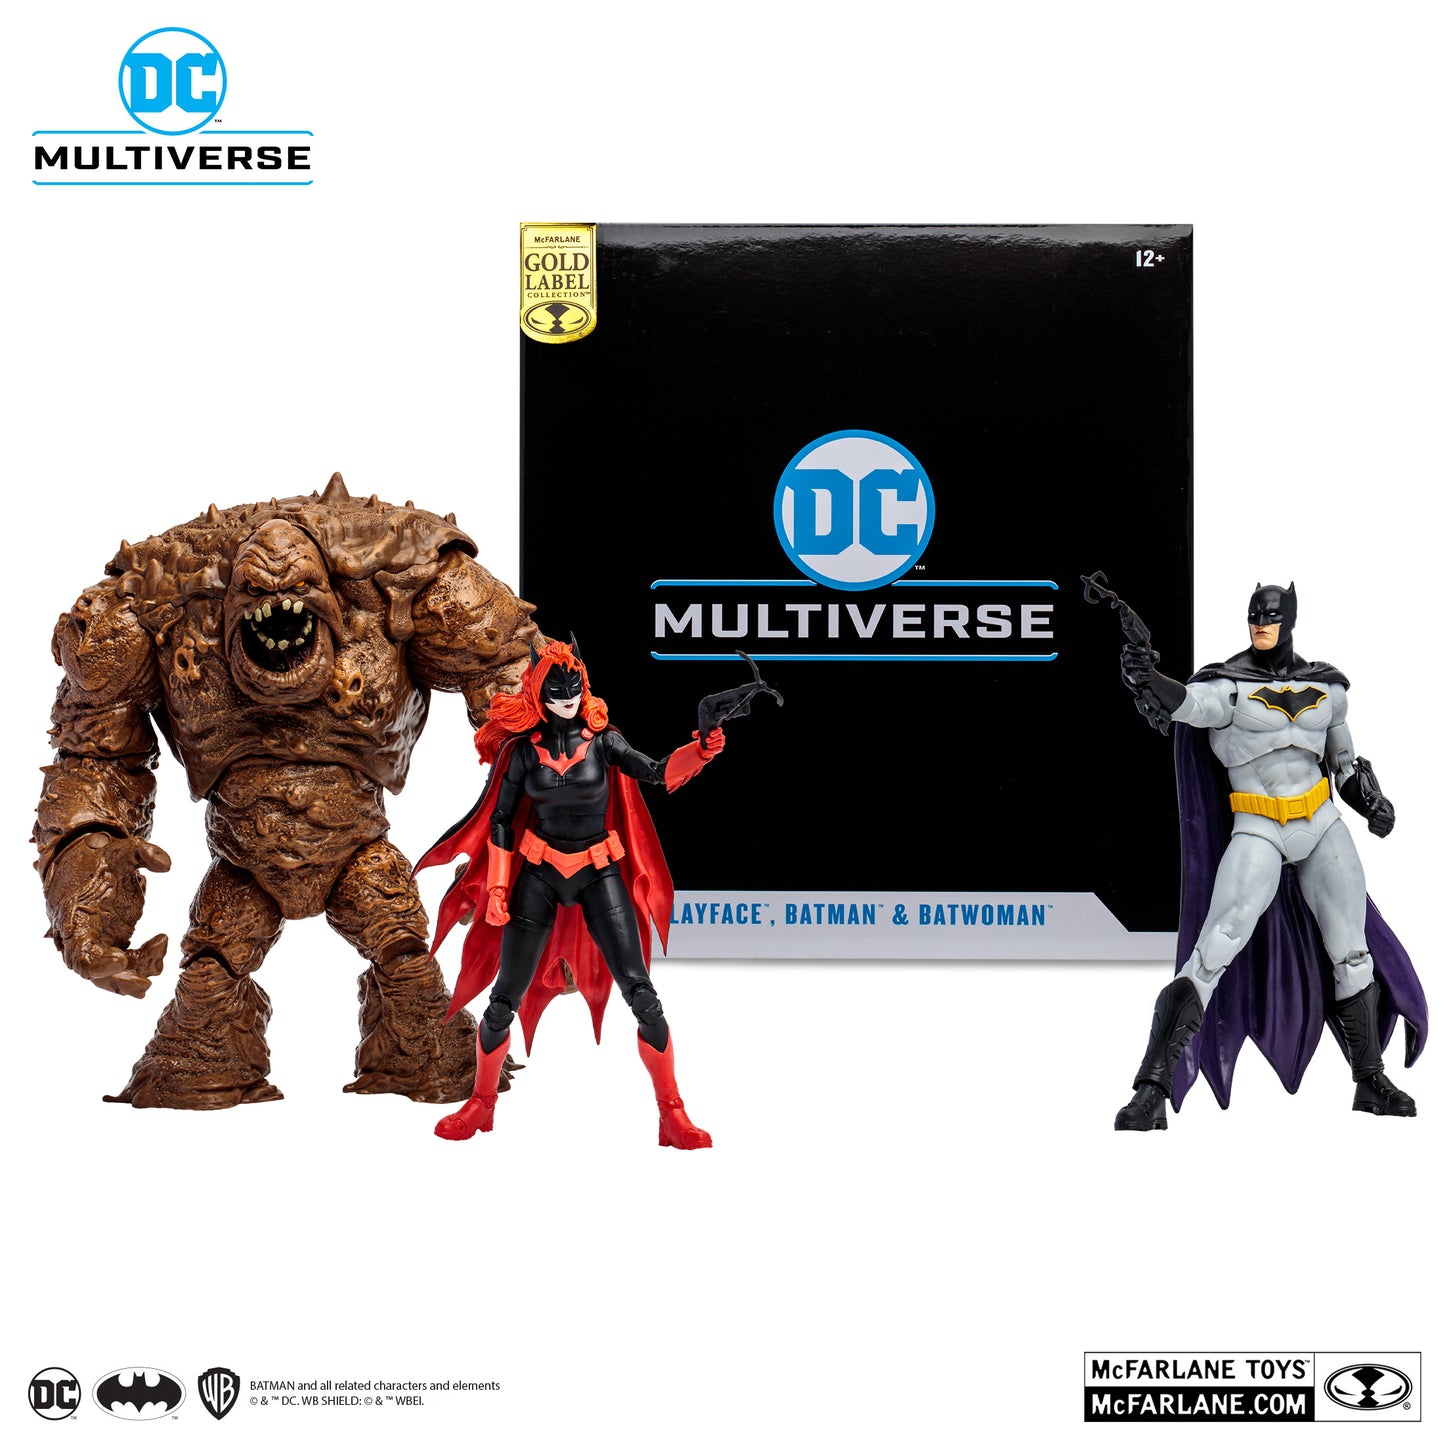 DC Multiverse Clayface, Batwoman and Batman (REBIRTH)(GOLD LABEL) Action Figure Toy